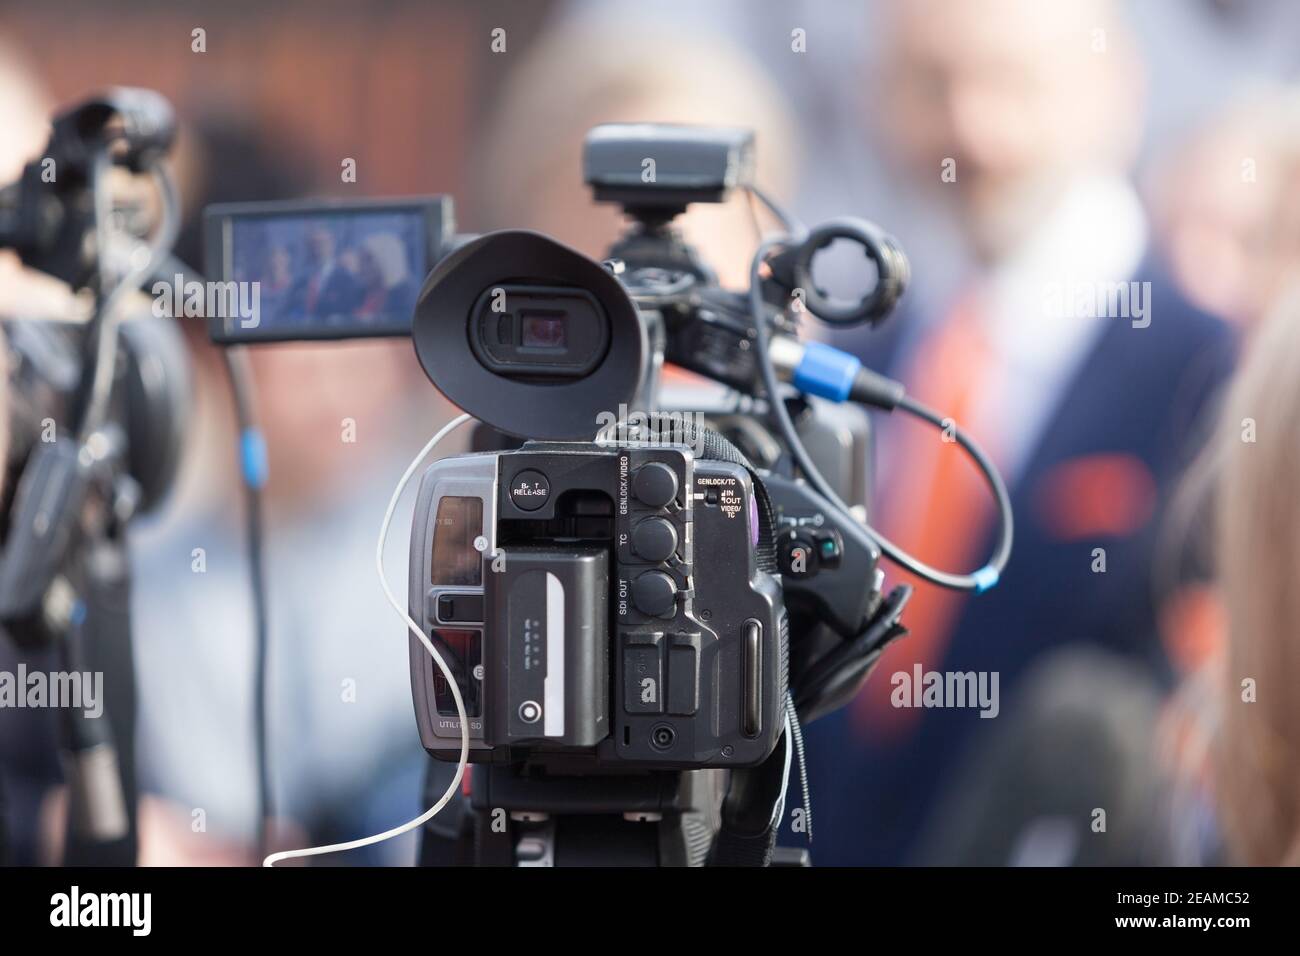 Filming news or press conference with a video camera. Stock Photo